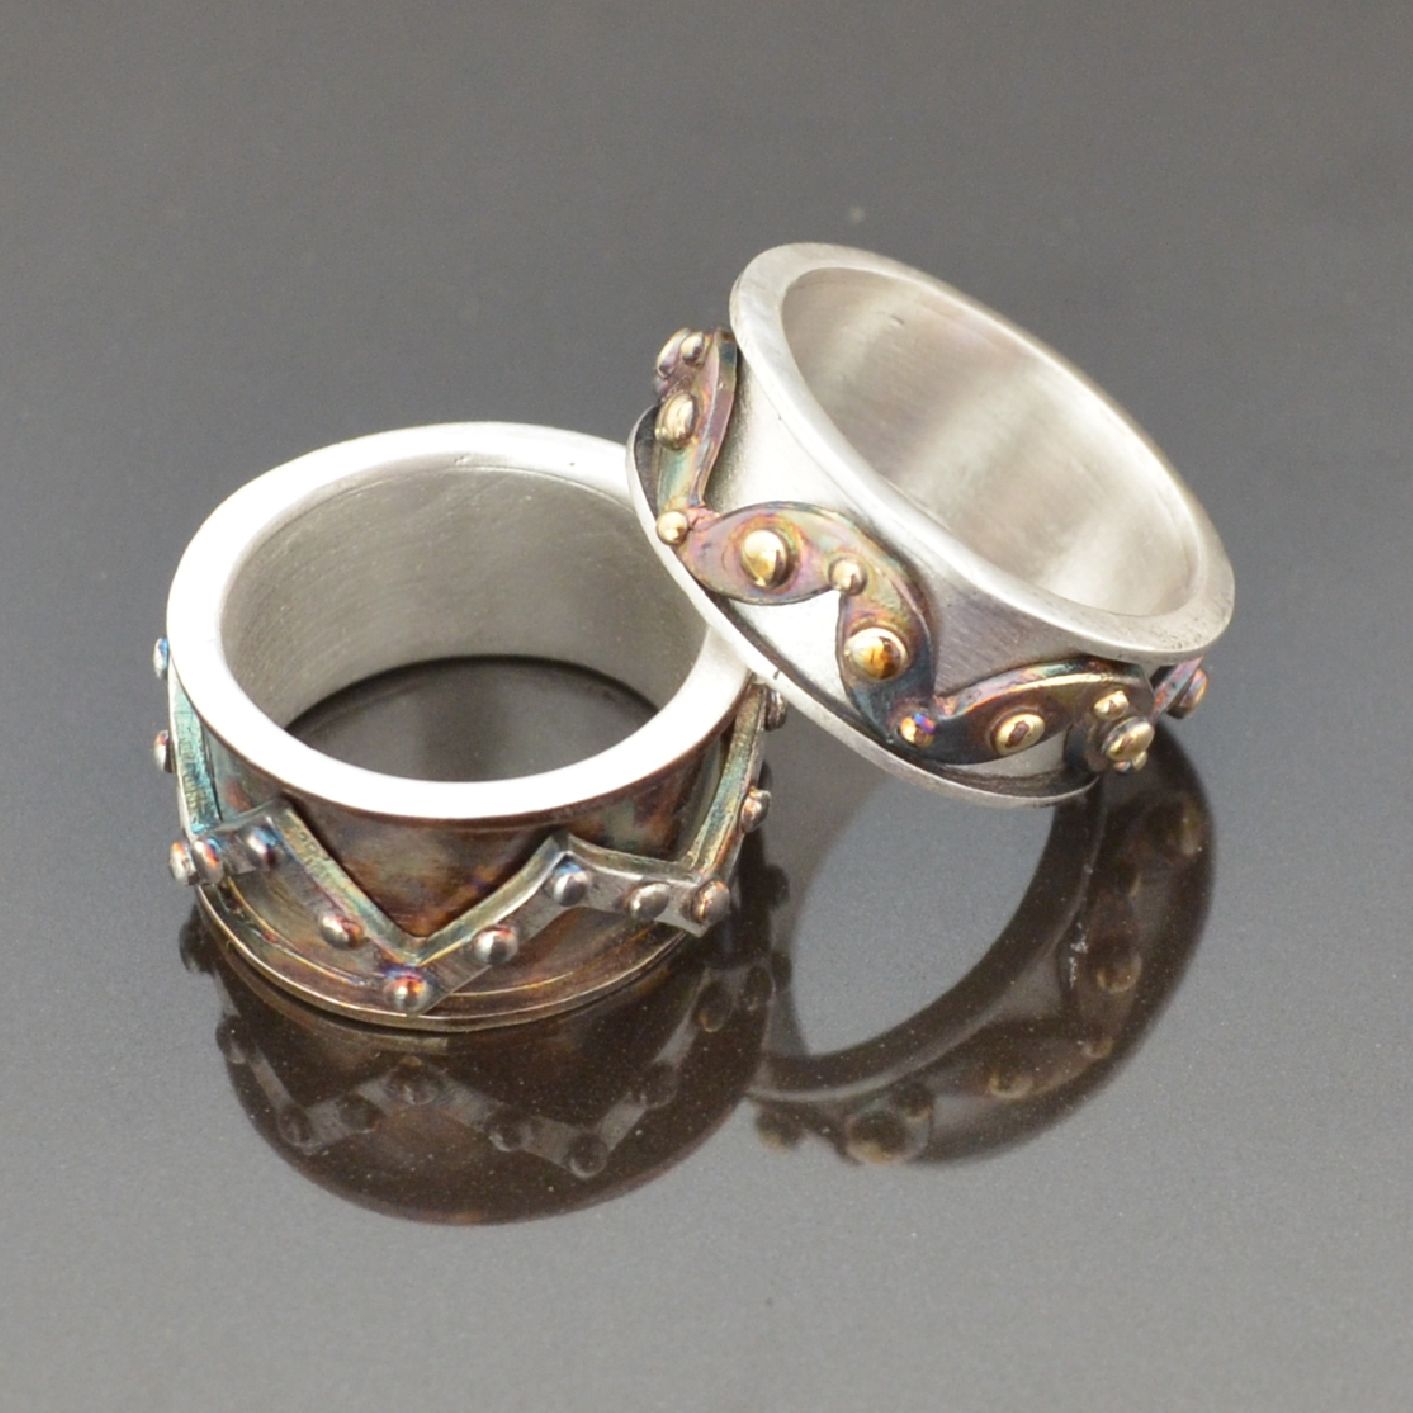 Spinner Rings by Tracey Spurgin of Craftworx Jewellery Workshops